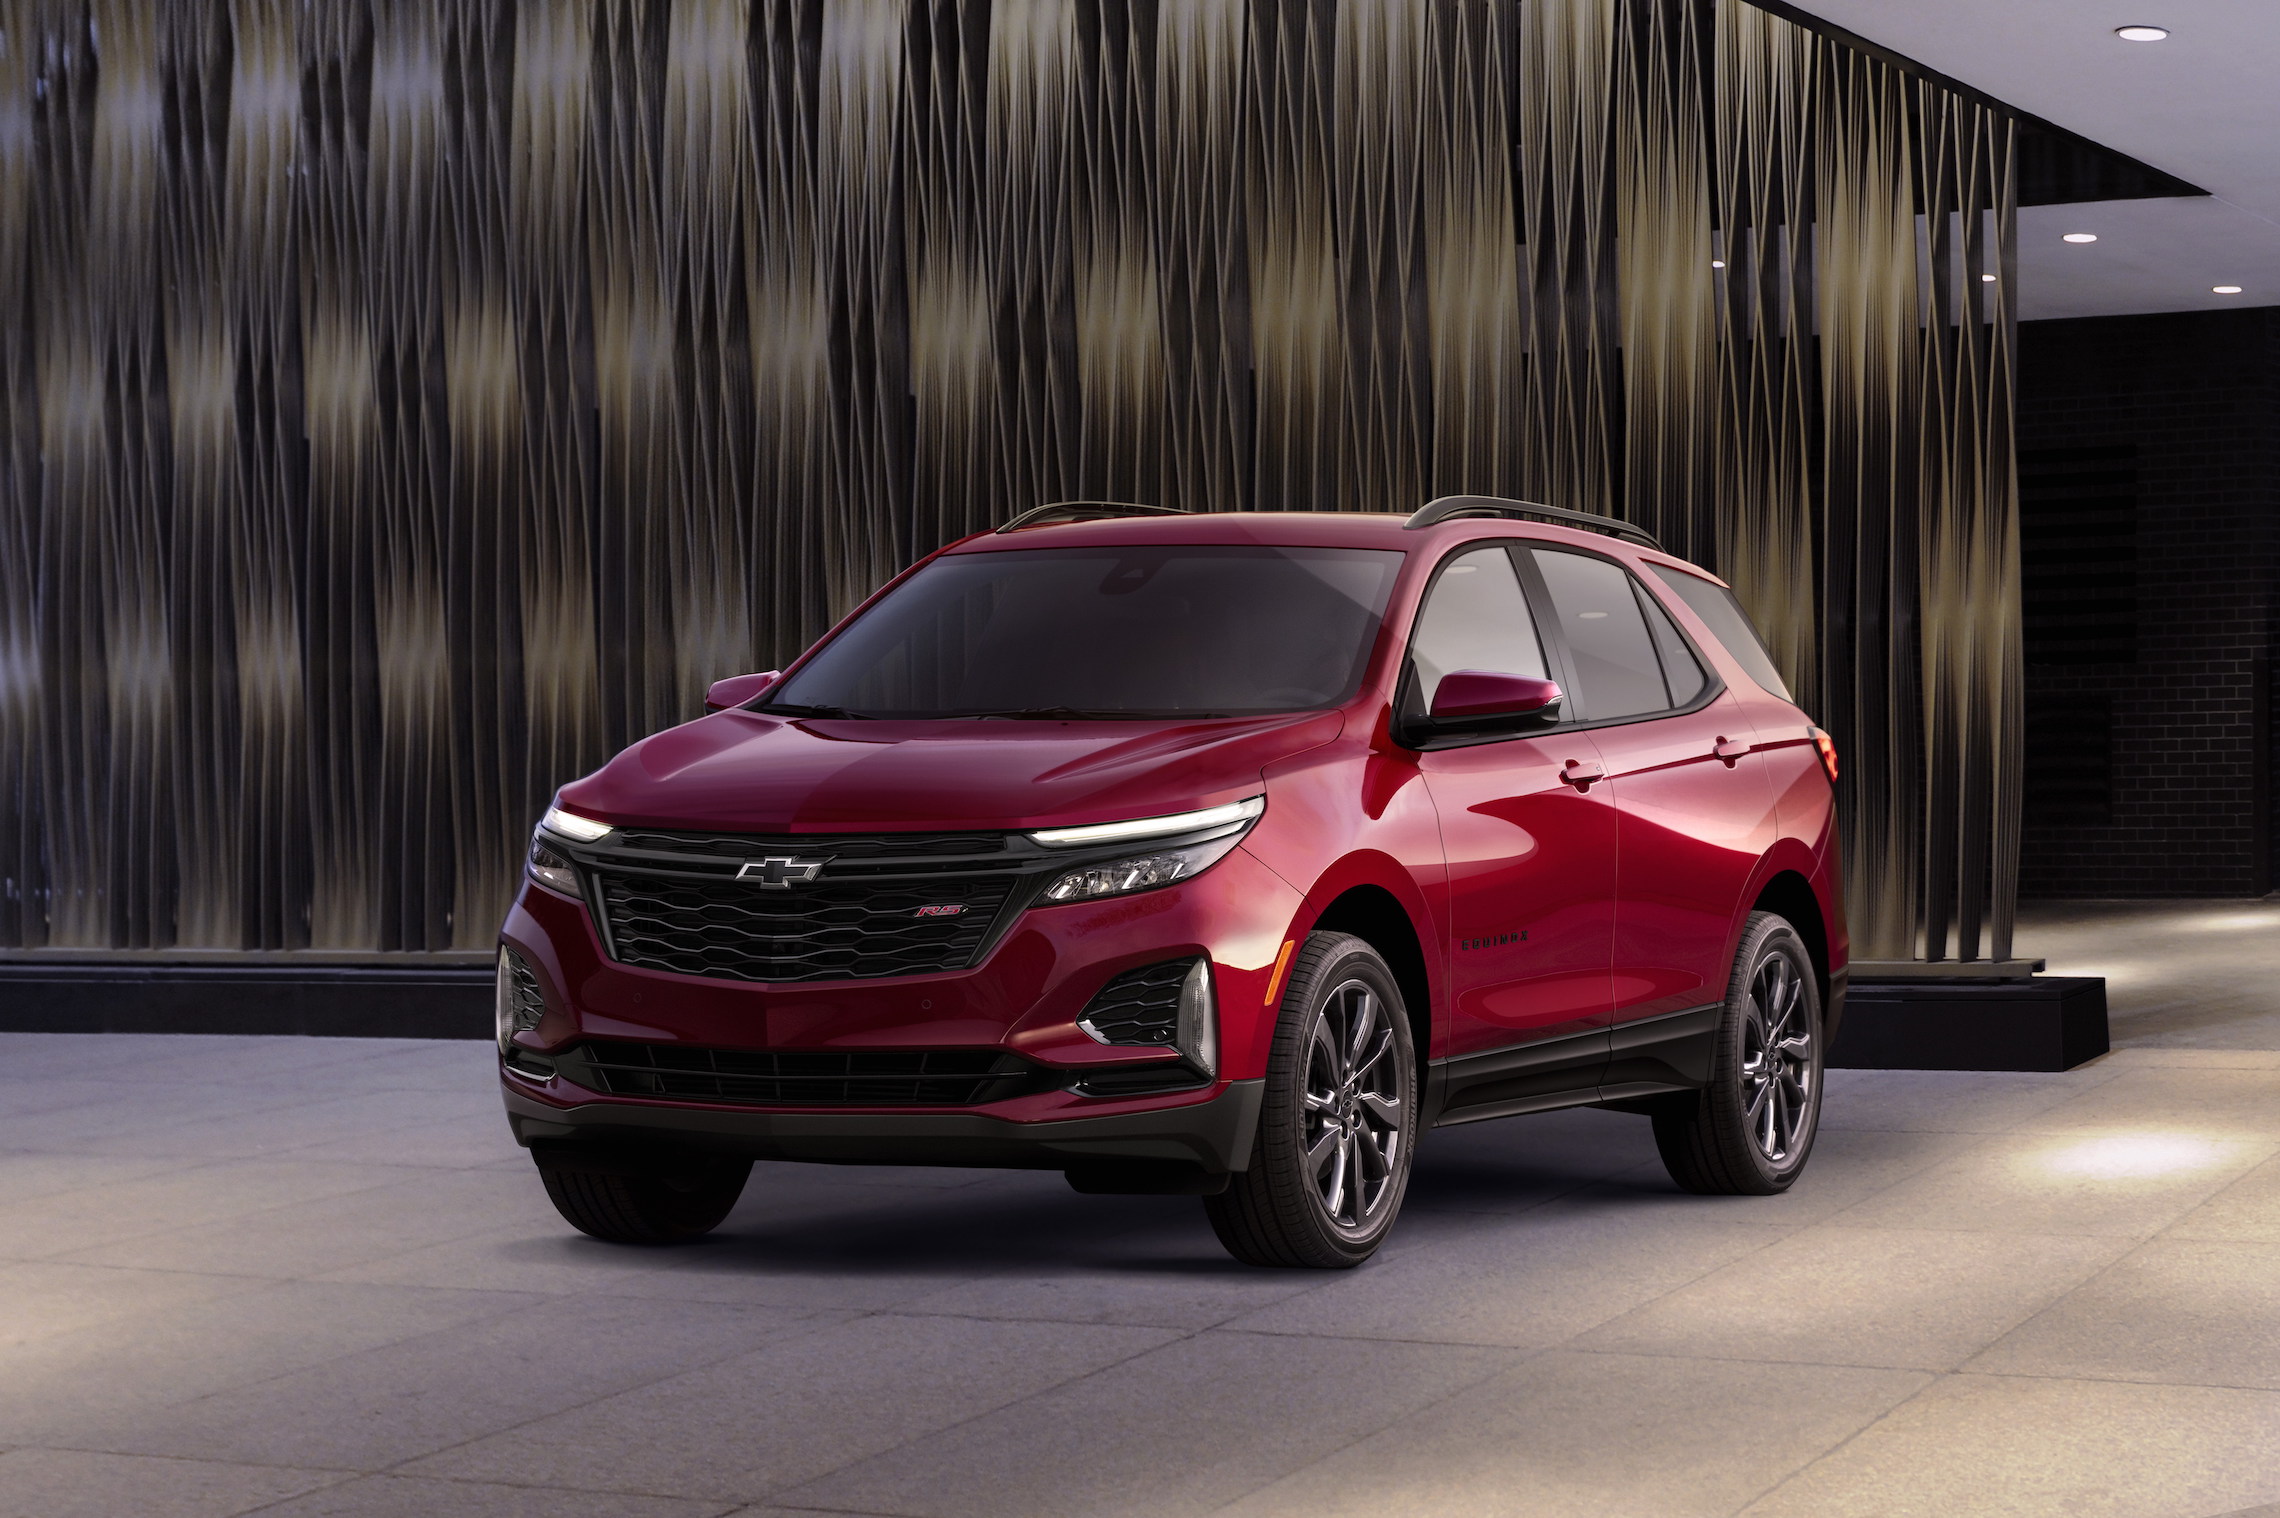 When Will the 2022 Chevrolet Equinox and Traverse Be Released? The